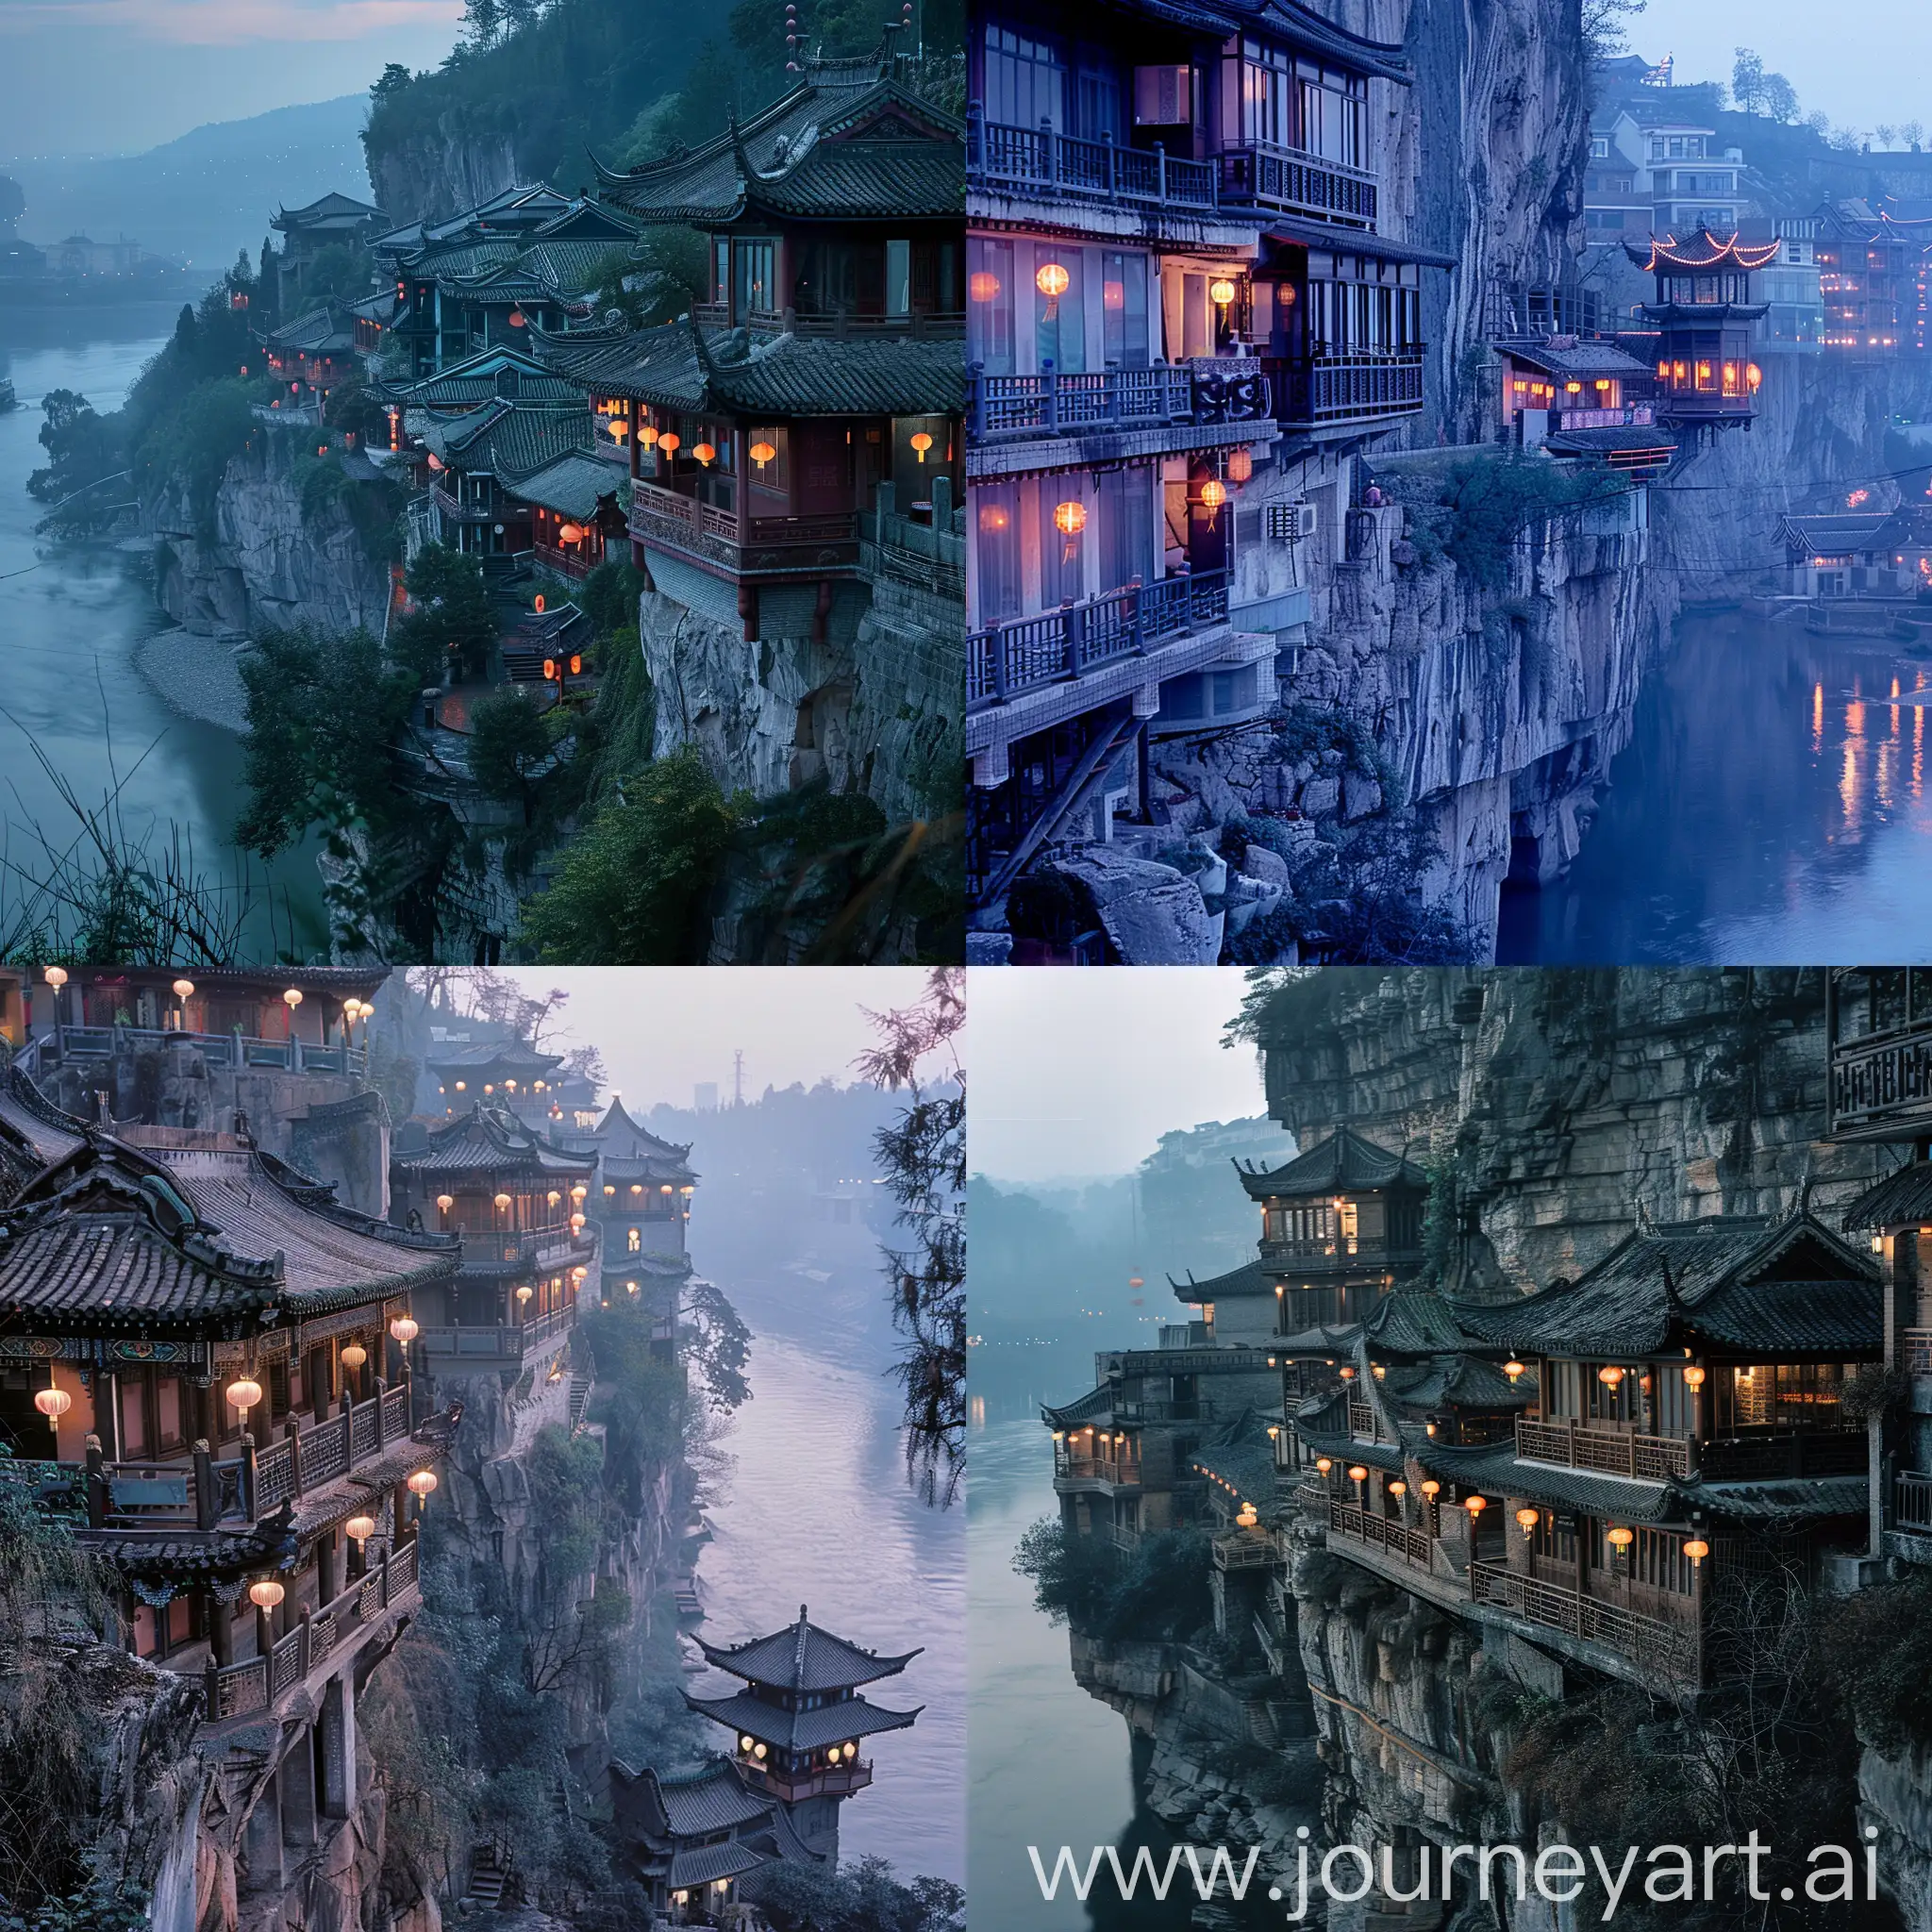 Dusk-Serenity-Suspended-Chinese-Architecture-Along-Riverbank